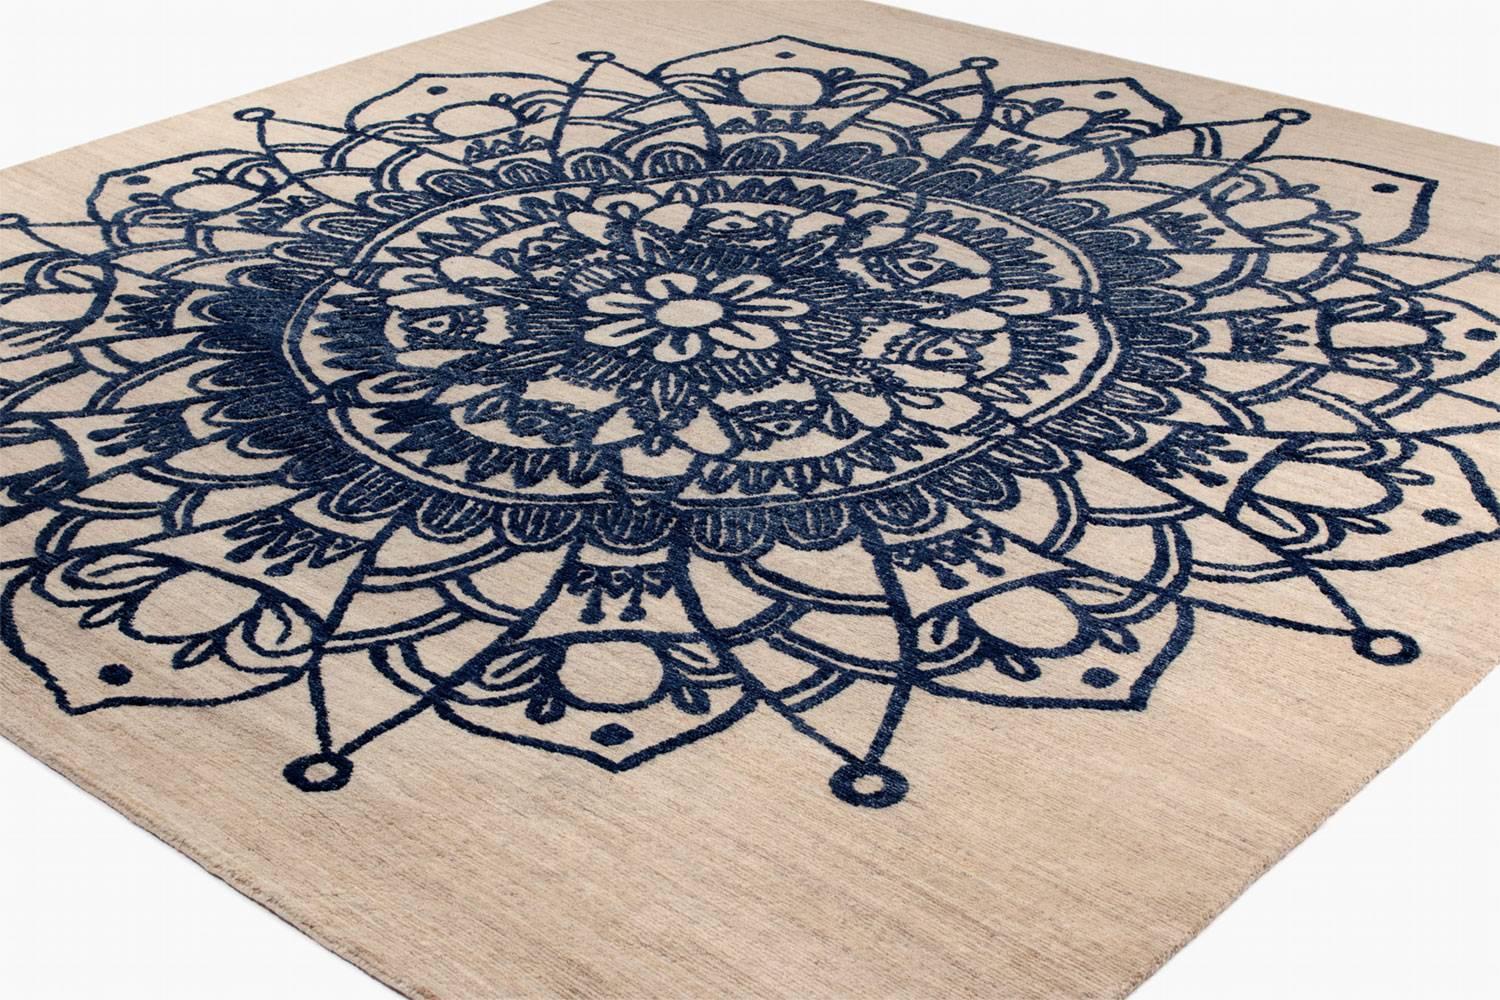 This eastern floral design by Joseph Carini was inspired by Islamic tiles. Made with Himalayan wool which was hand woven and hand spun in a 'Shiva Puri' weave. 

   

Joseph Carini is the owner of Joseph Carini carpets and has been involved in